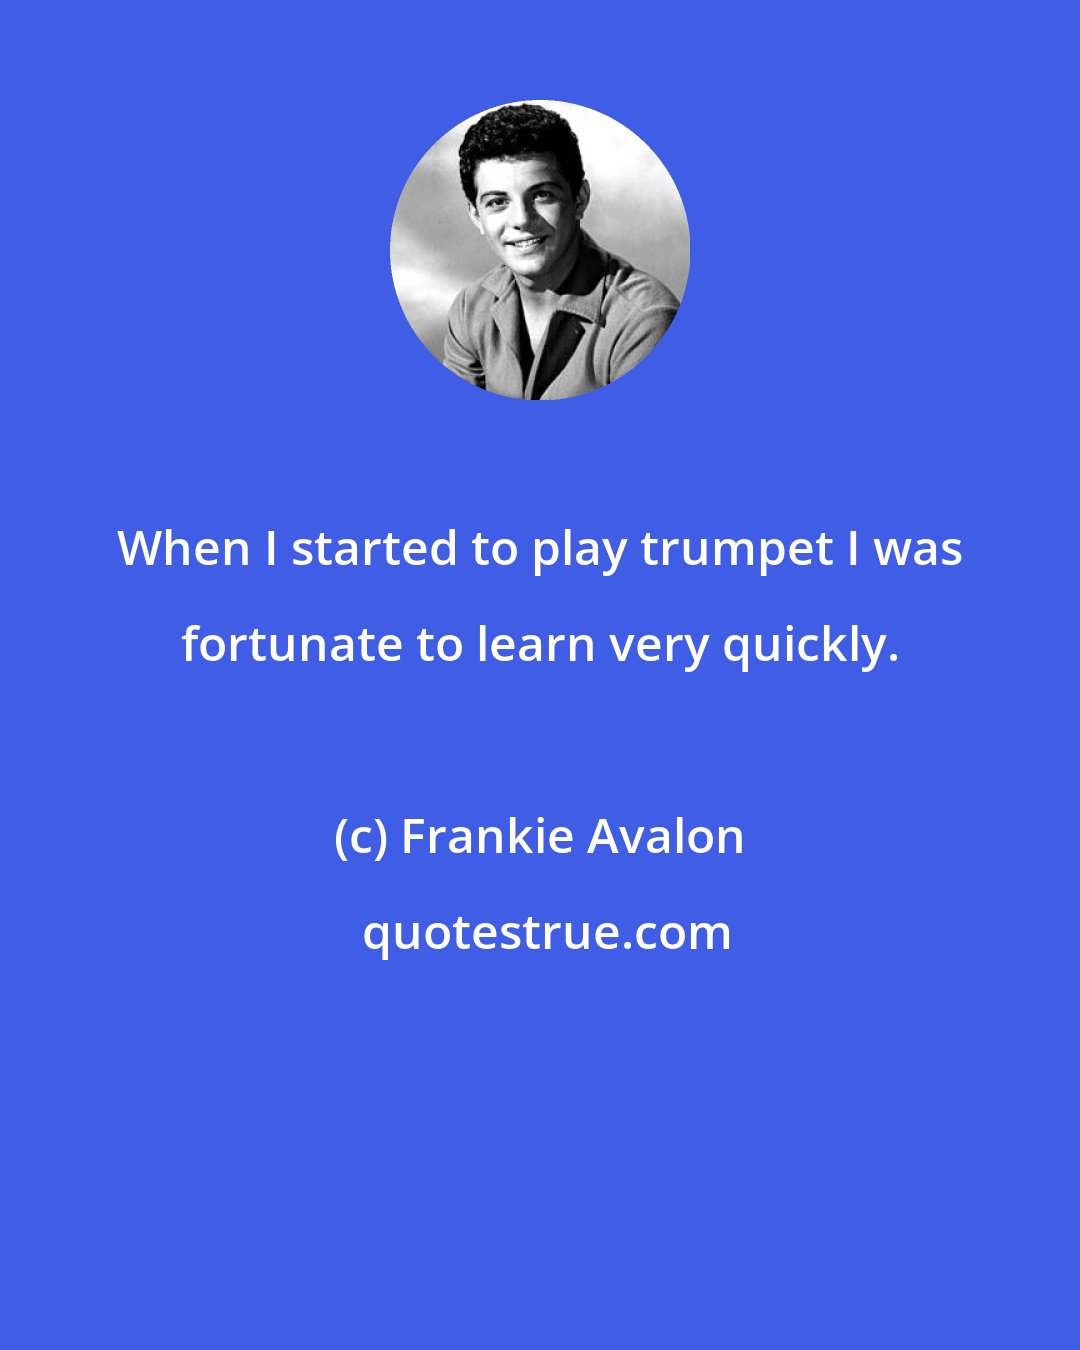 Frankie Avalon: When I started to play trumpet I was fortunate to learn very quickly.